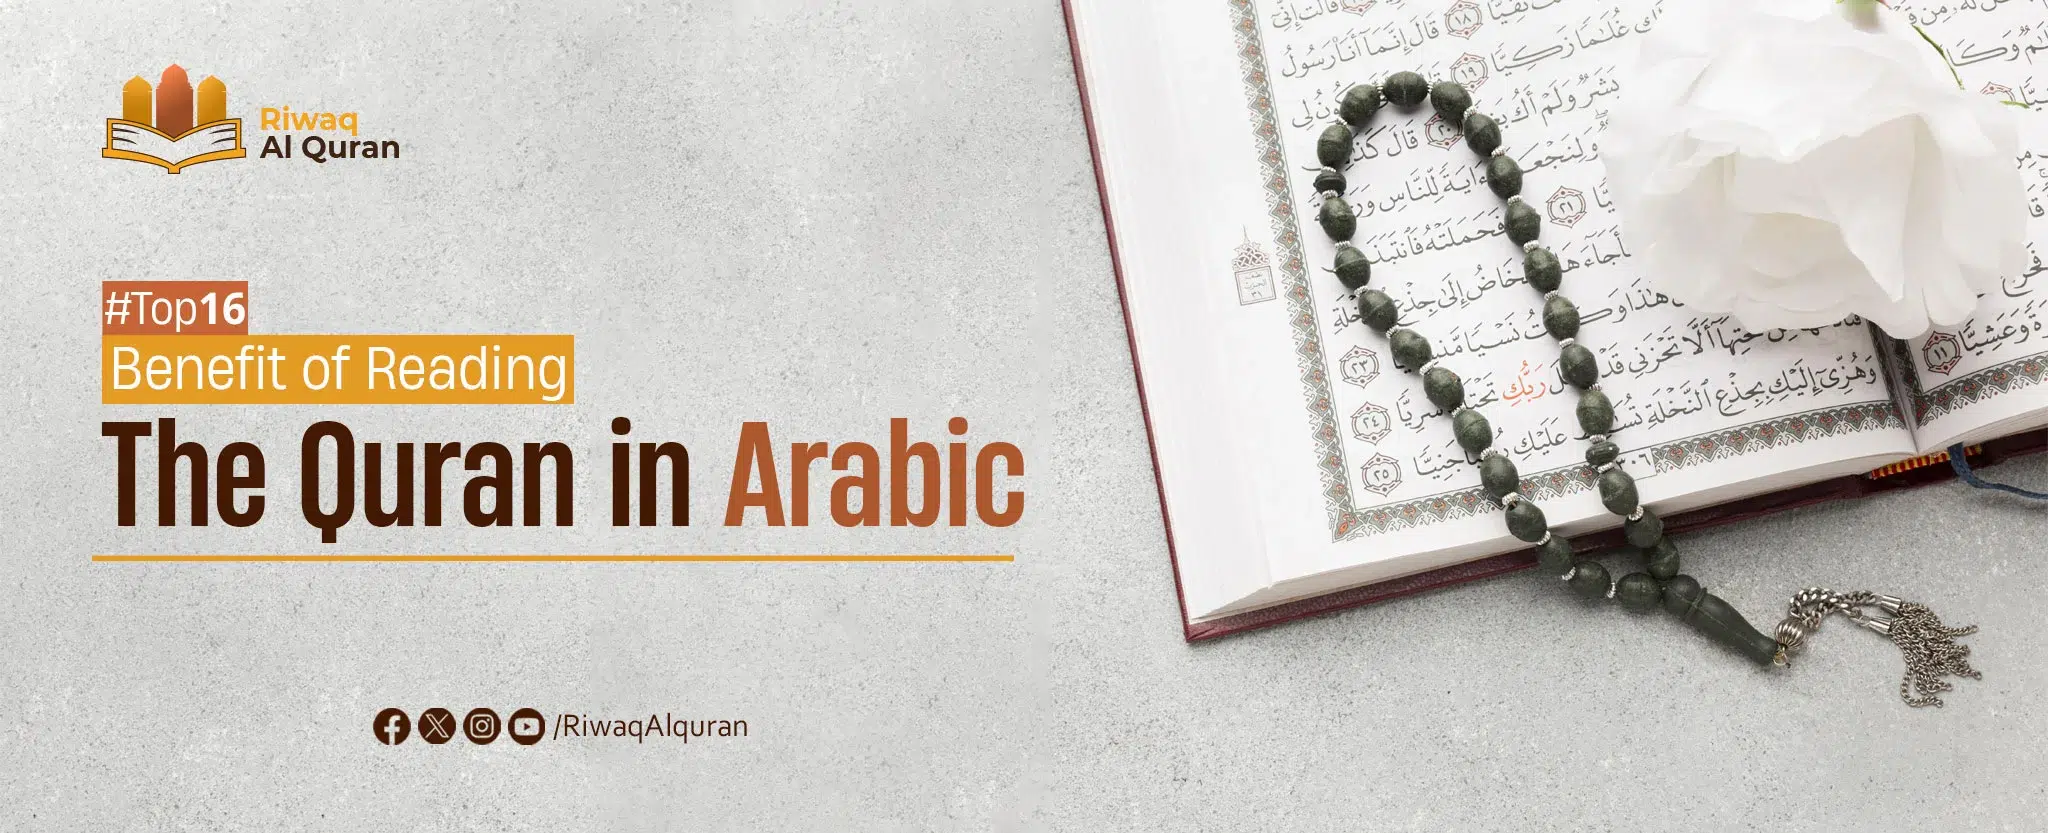 Top 16 Benefits of Reading the Quran in Arabic